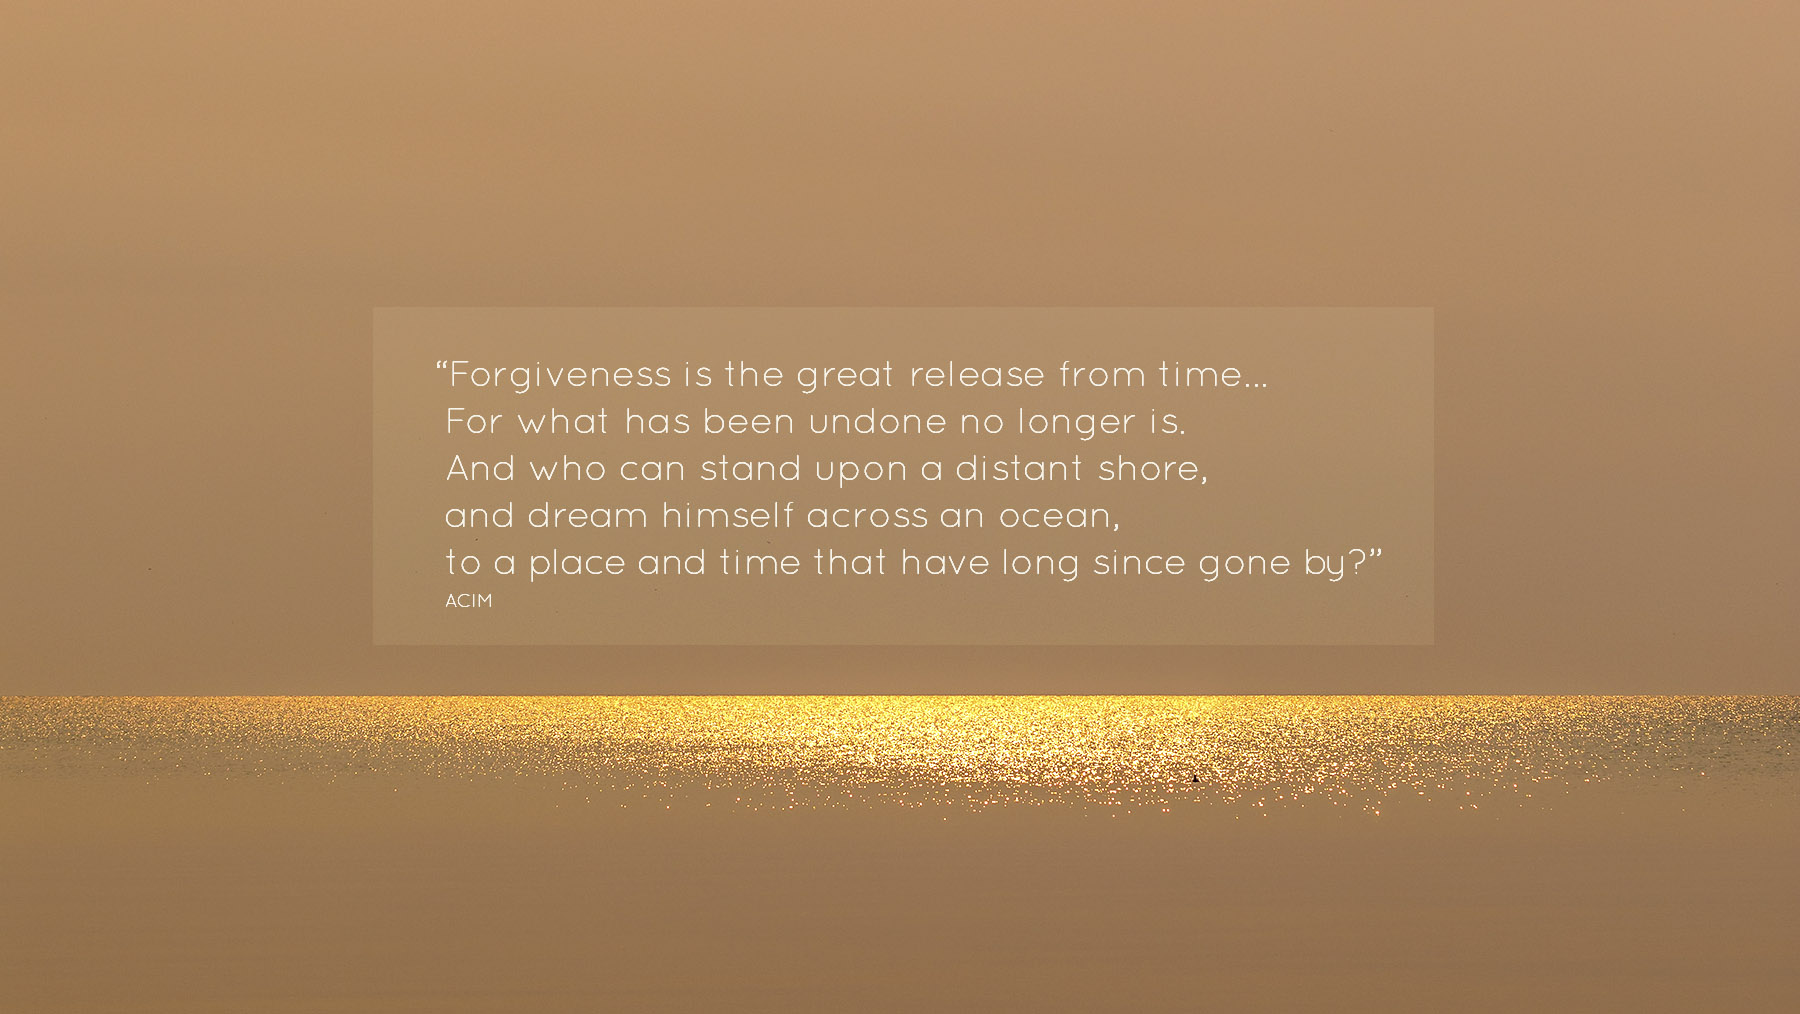 Forgiveness is the great release from time. It is the key to learning that the past is over… For what has been undone no longer is. And who can stand upon a distant shore, and dream himself across an ocean, to a place and time that have long since gone by?